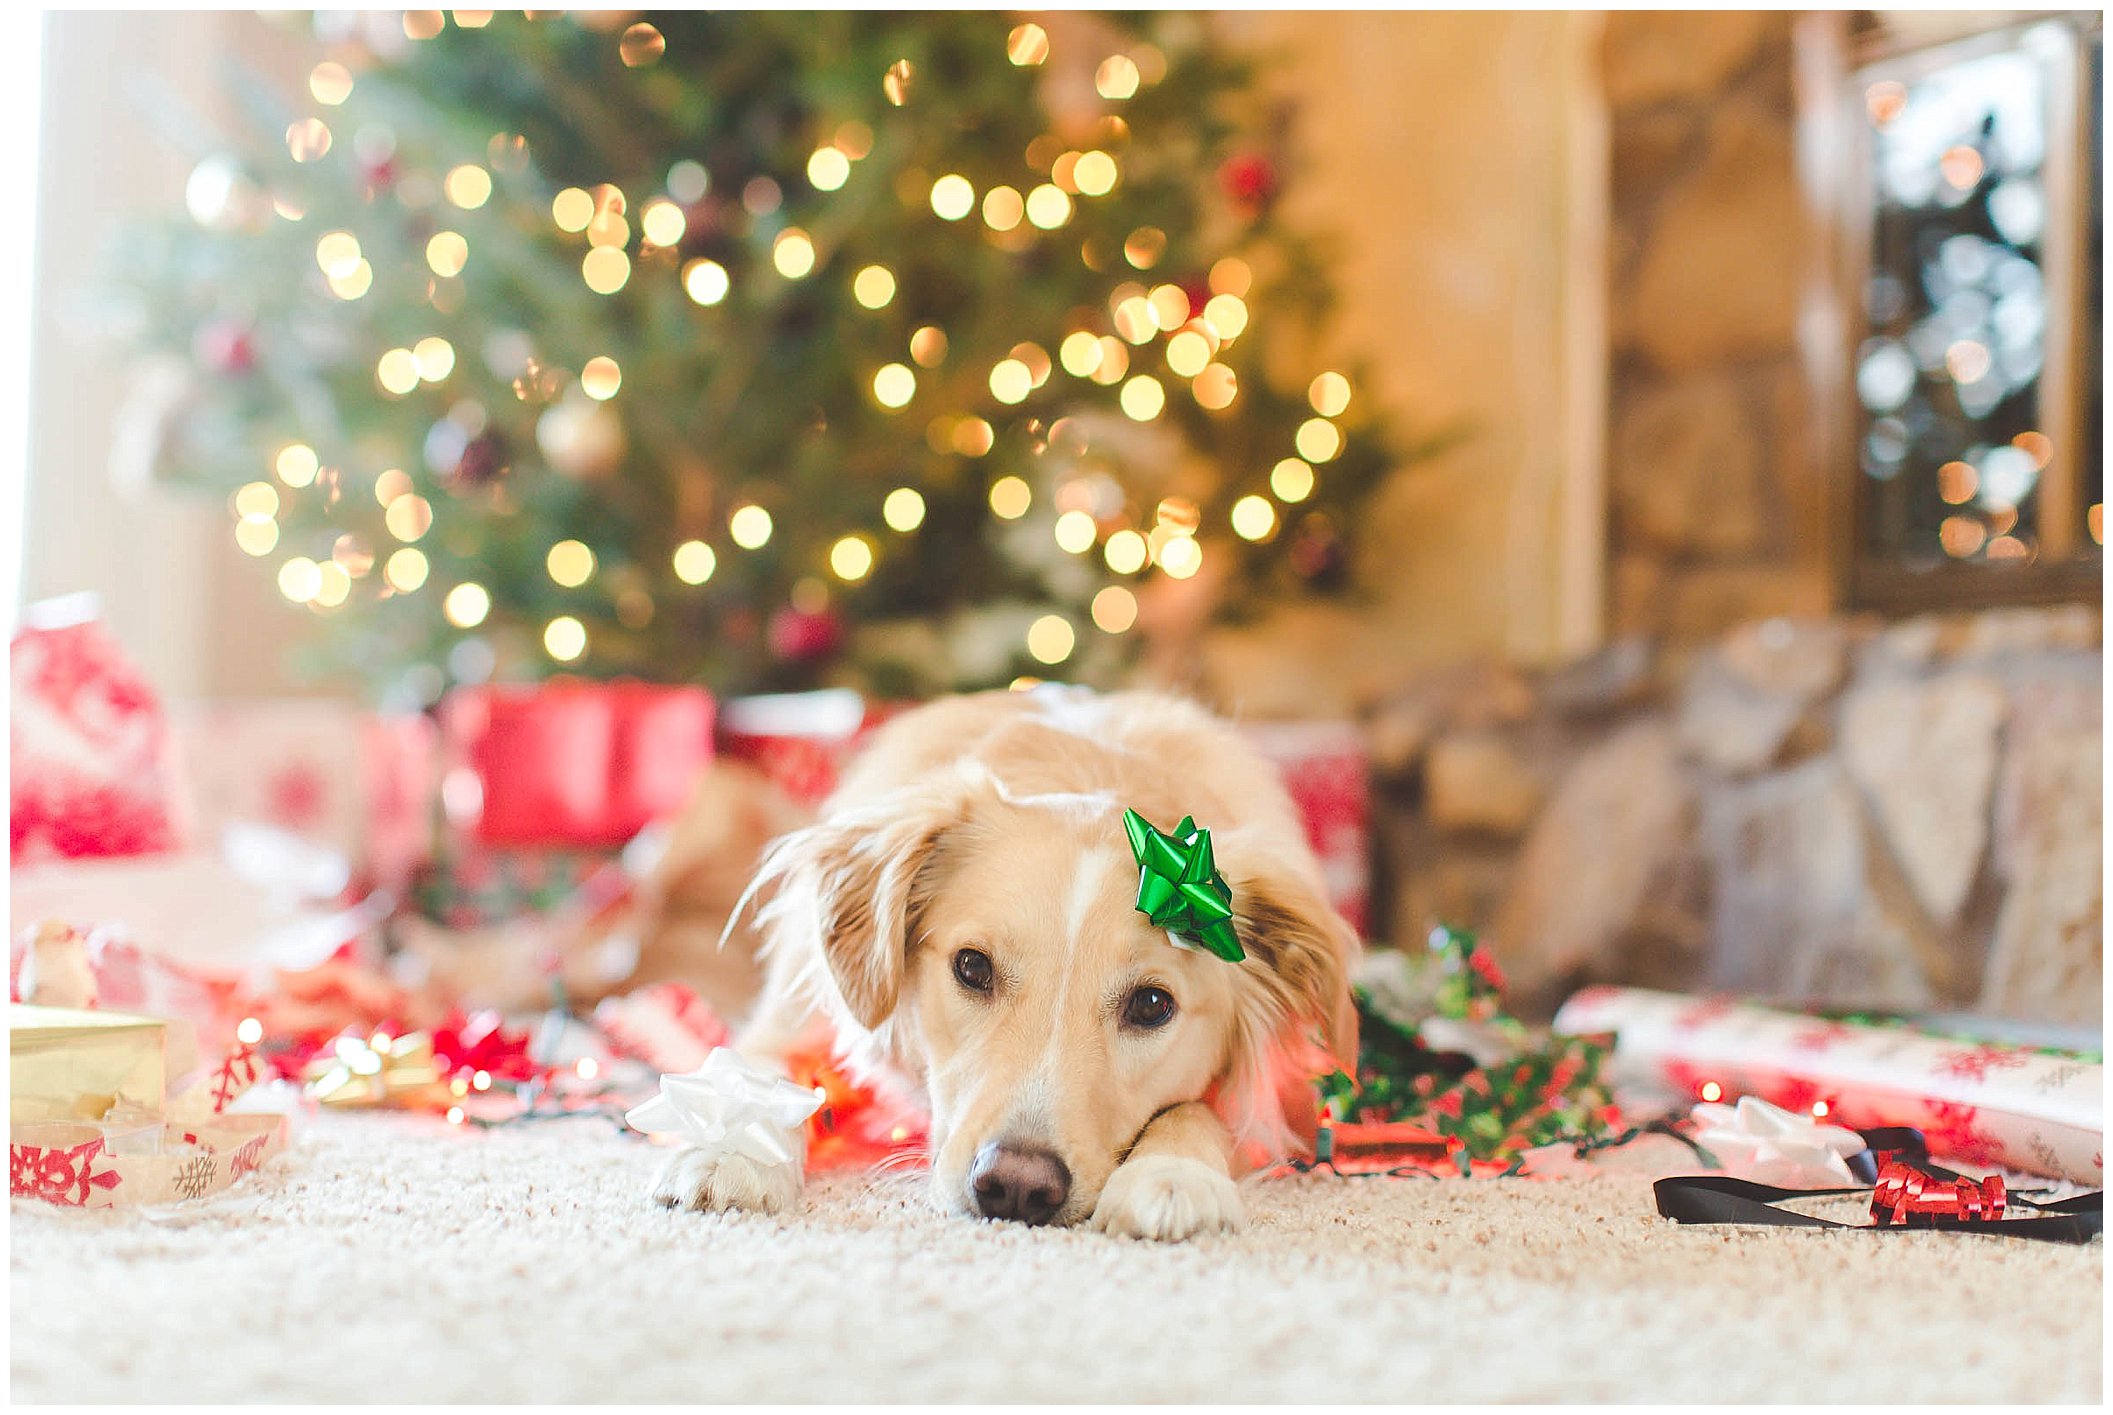 Adorable Puppy Christmas Photos, Wrapped up in lights Christmas photos_0008.jpg